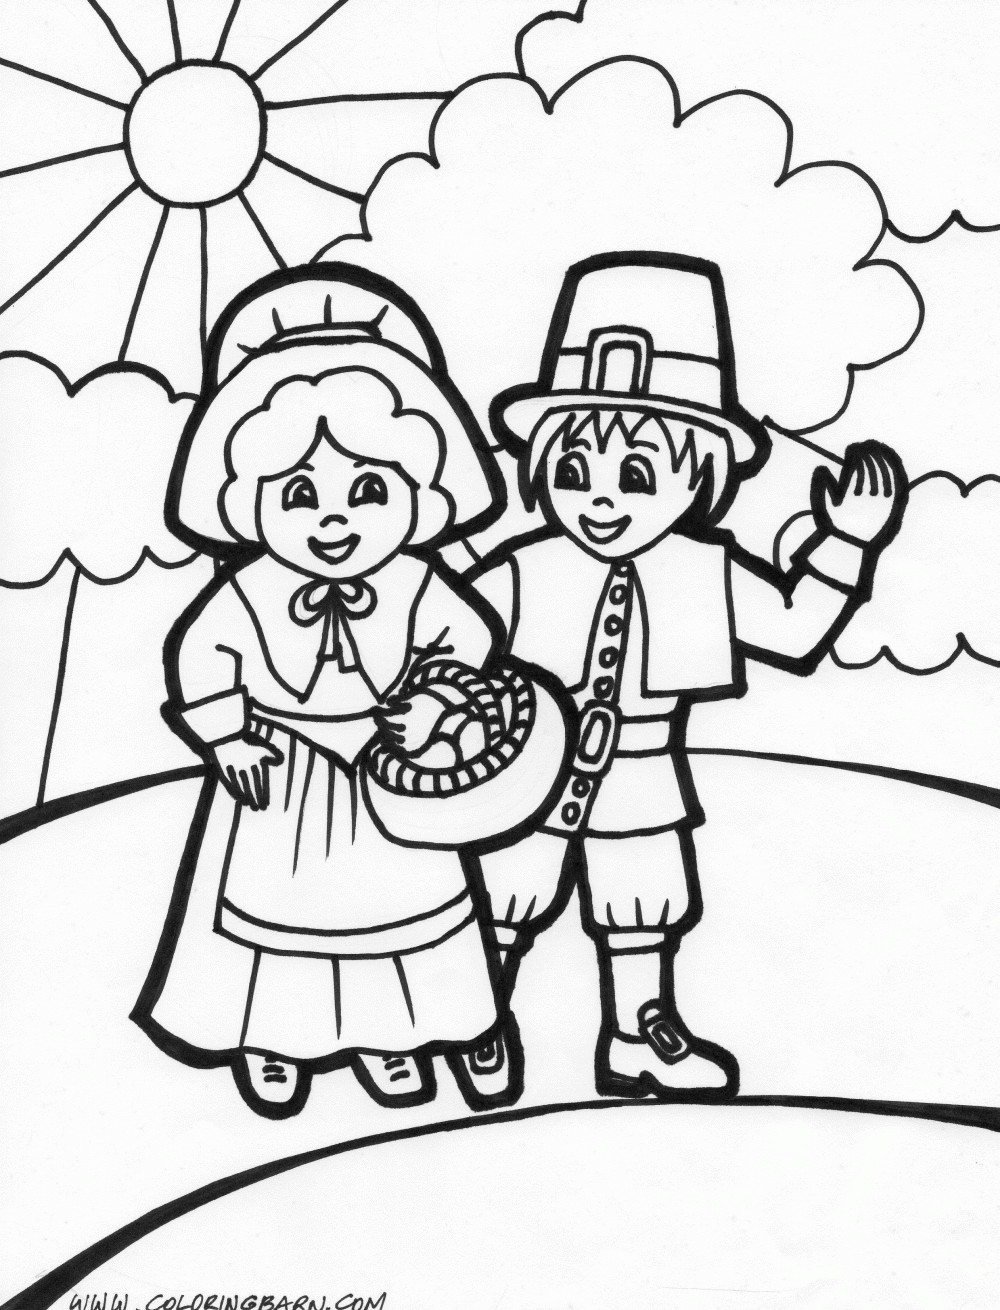 Free Printable Thanksgiving Coloring Pages
 Thanksgiving Pilgrim Coloring Pages Disney Coloring Pages